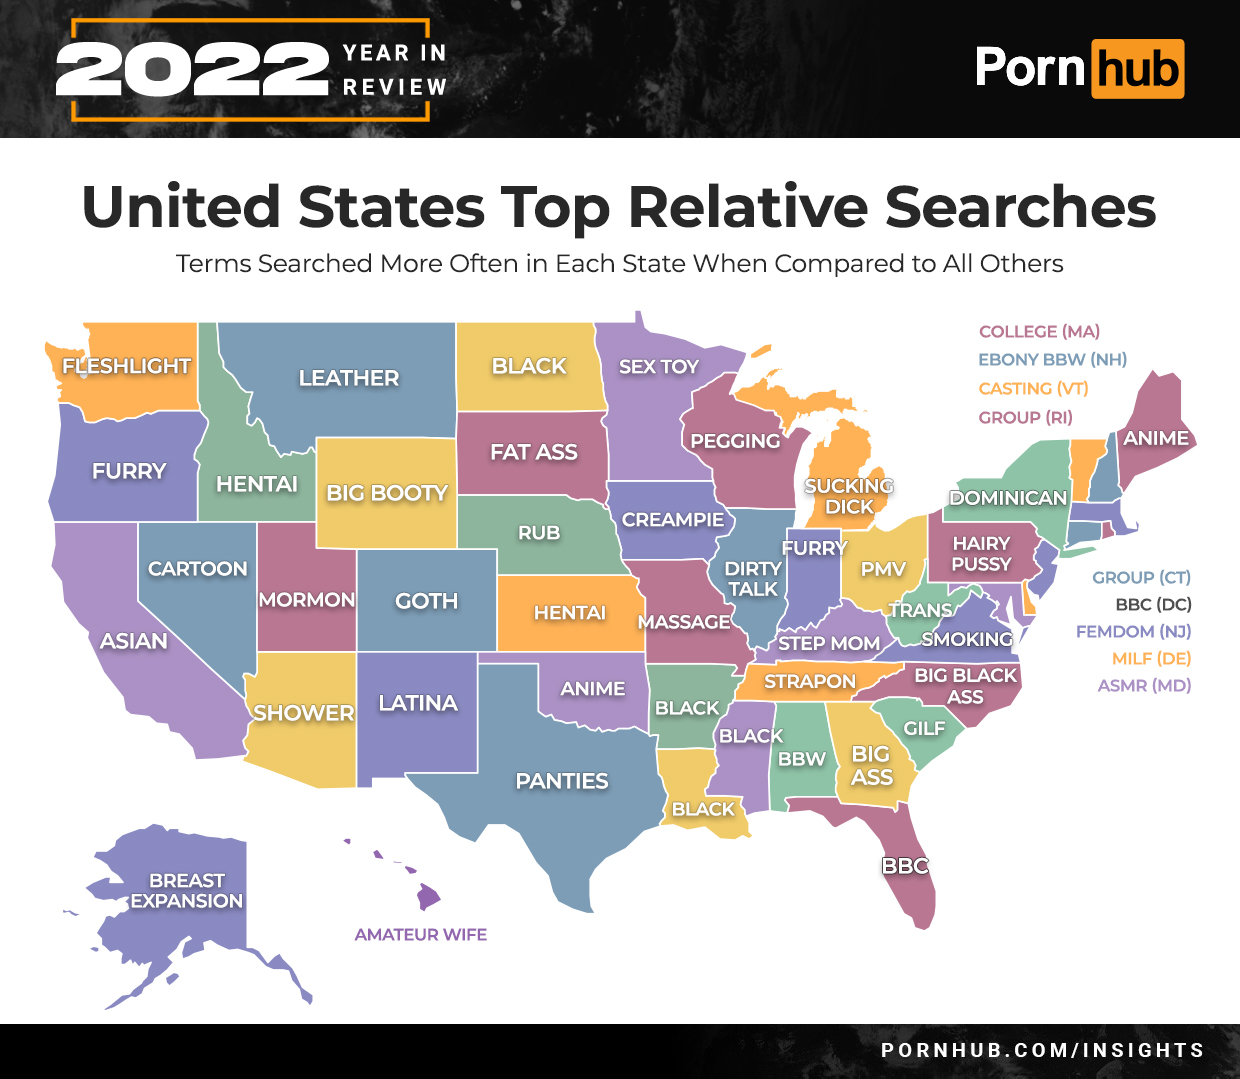 pornhub year in review 2022 - us map with states labeled - Year In 2022 Review United States Top Relative Searches Terms Searched More Often in Each State When Compared to All Others Fleshlight Furry Cartoon Asian Hentai Big Booty Leather Breast Expansion